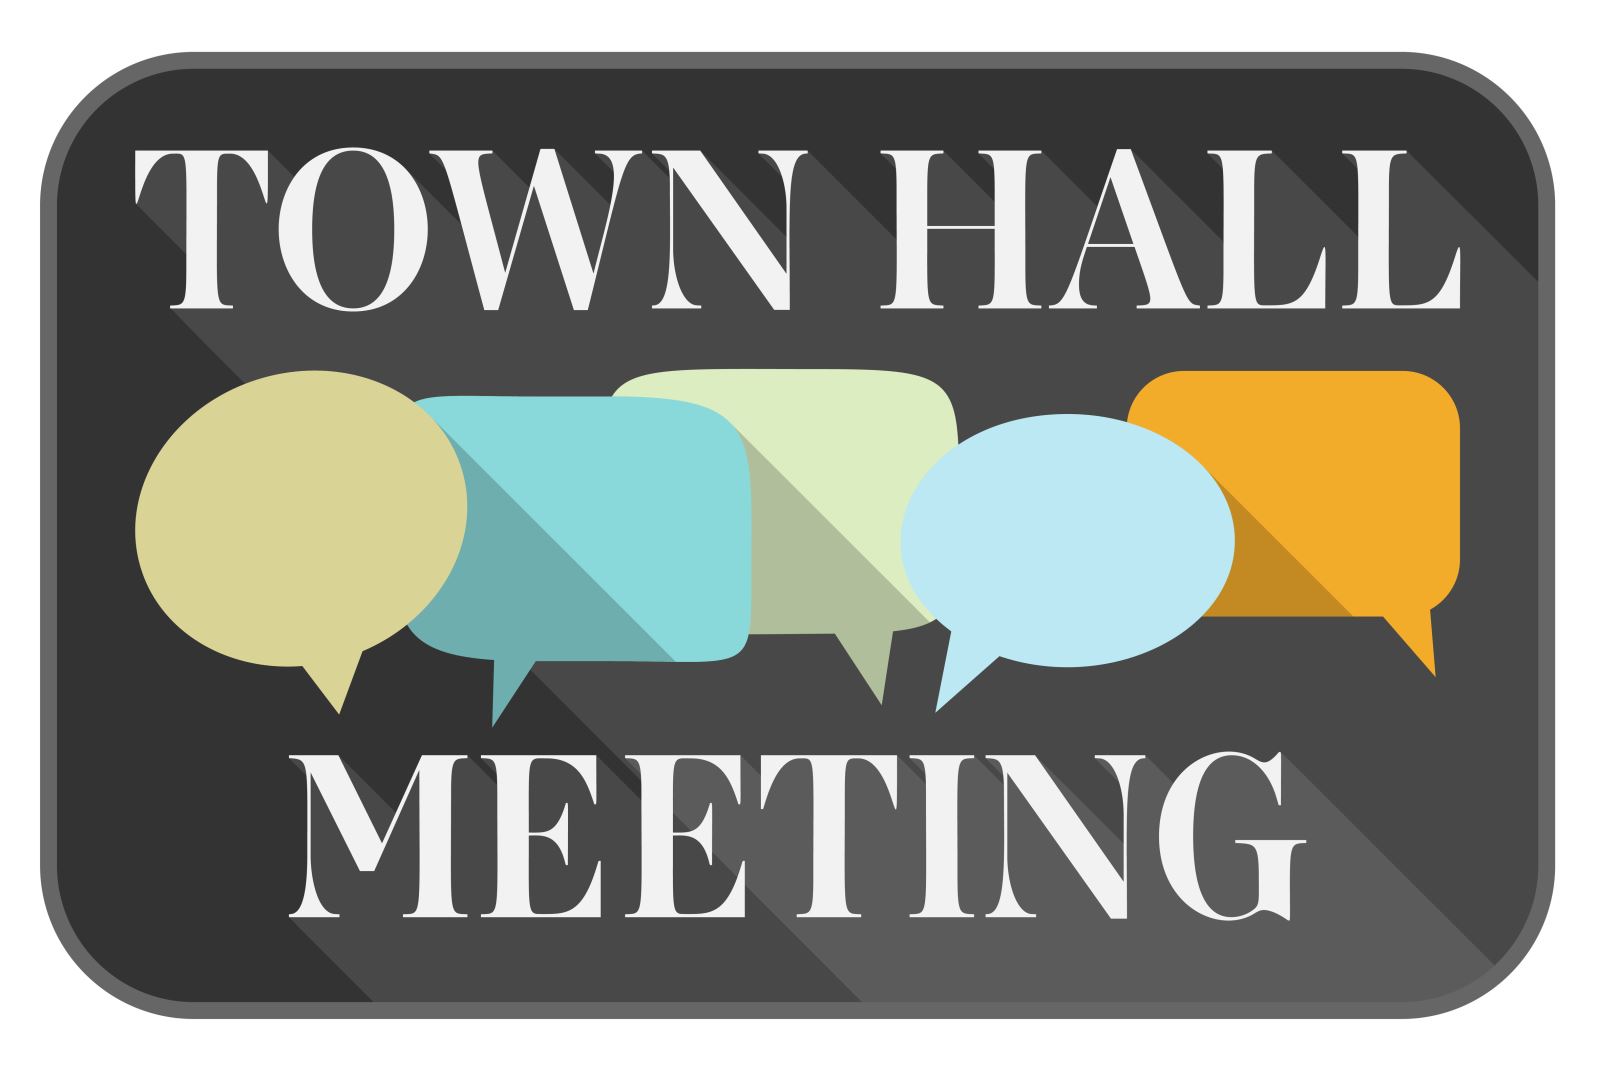 Iowa Town Hall Meetings on Digital Services